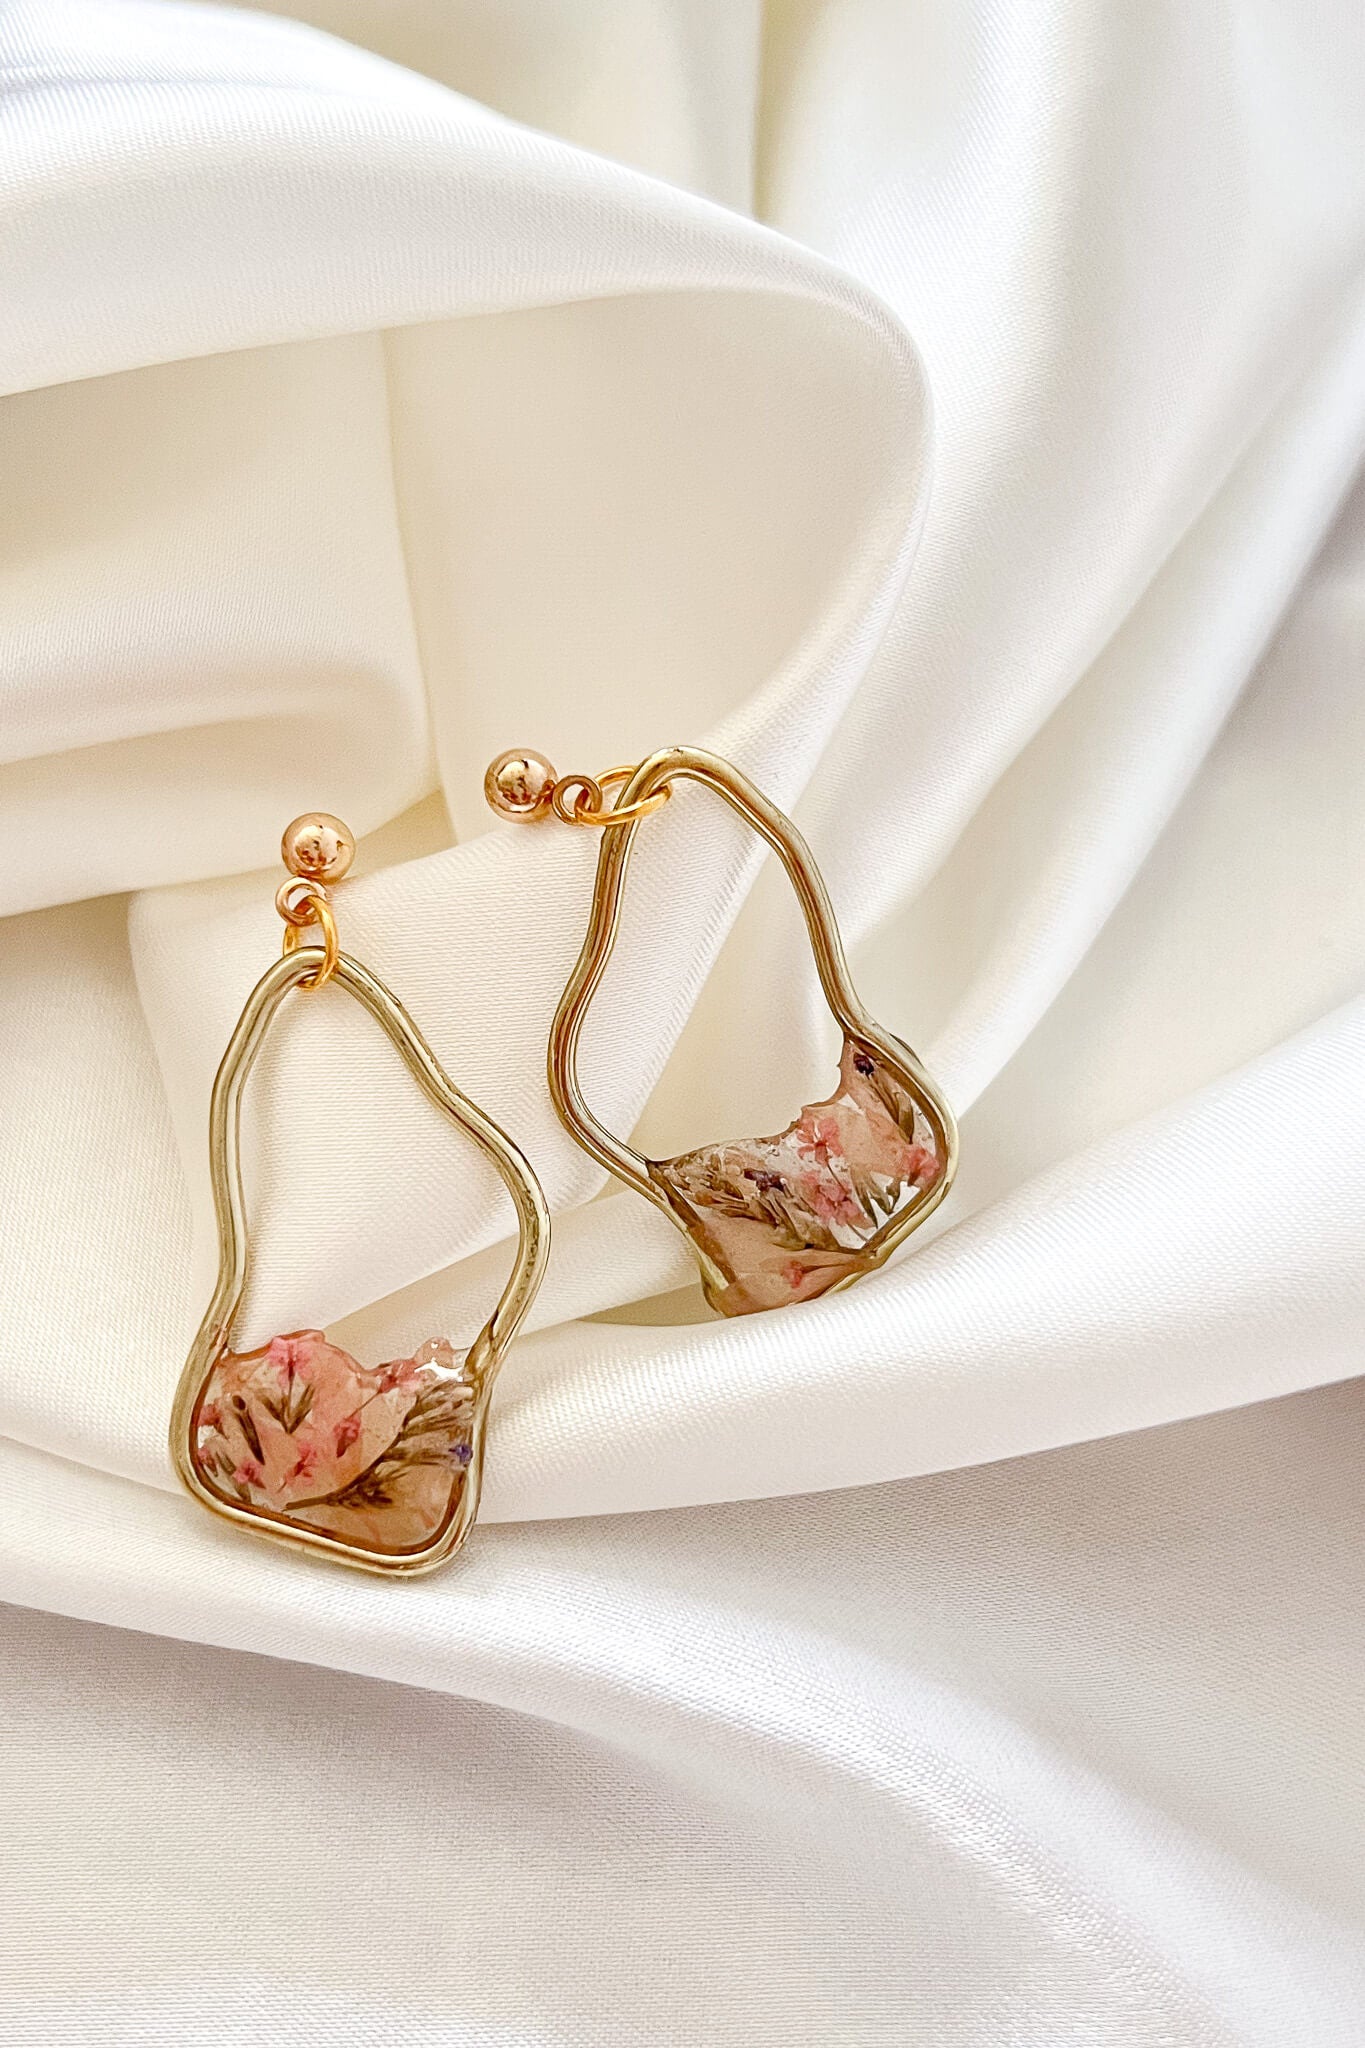 Handmade resin dangle earrings with gold hardware and dried flowers